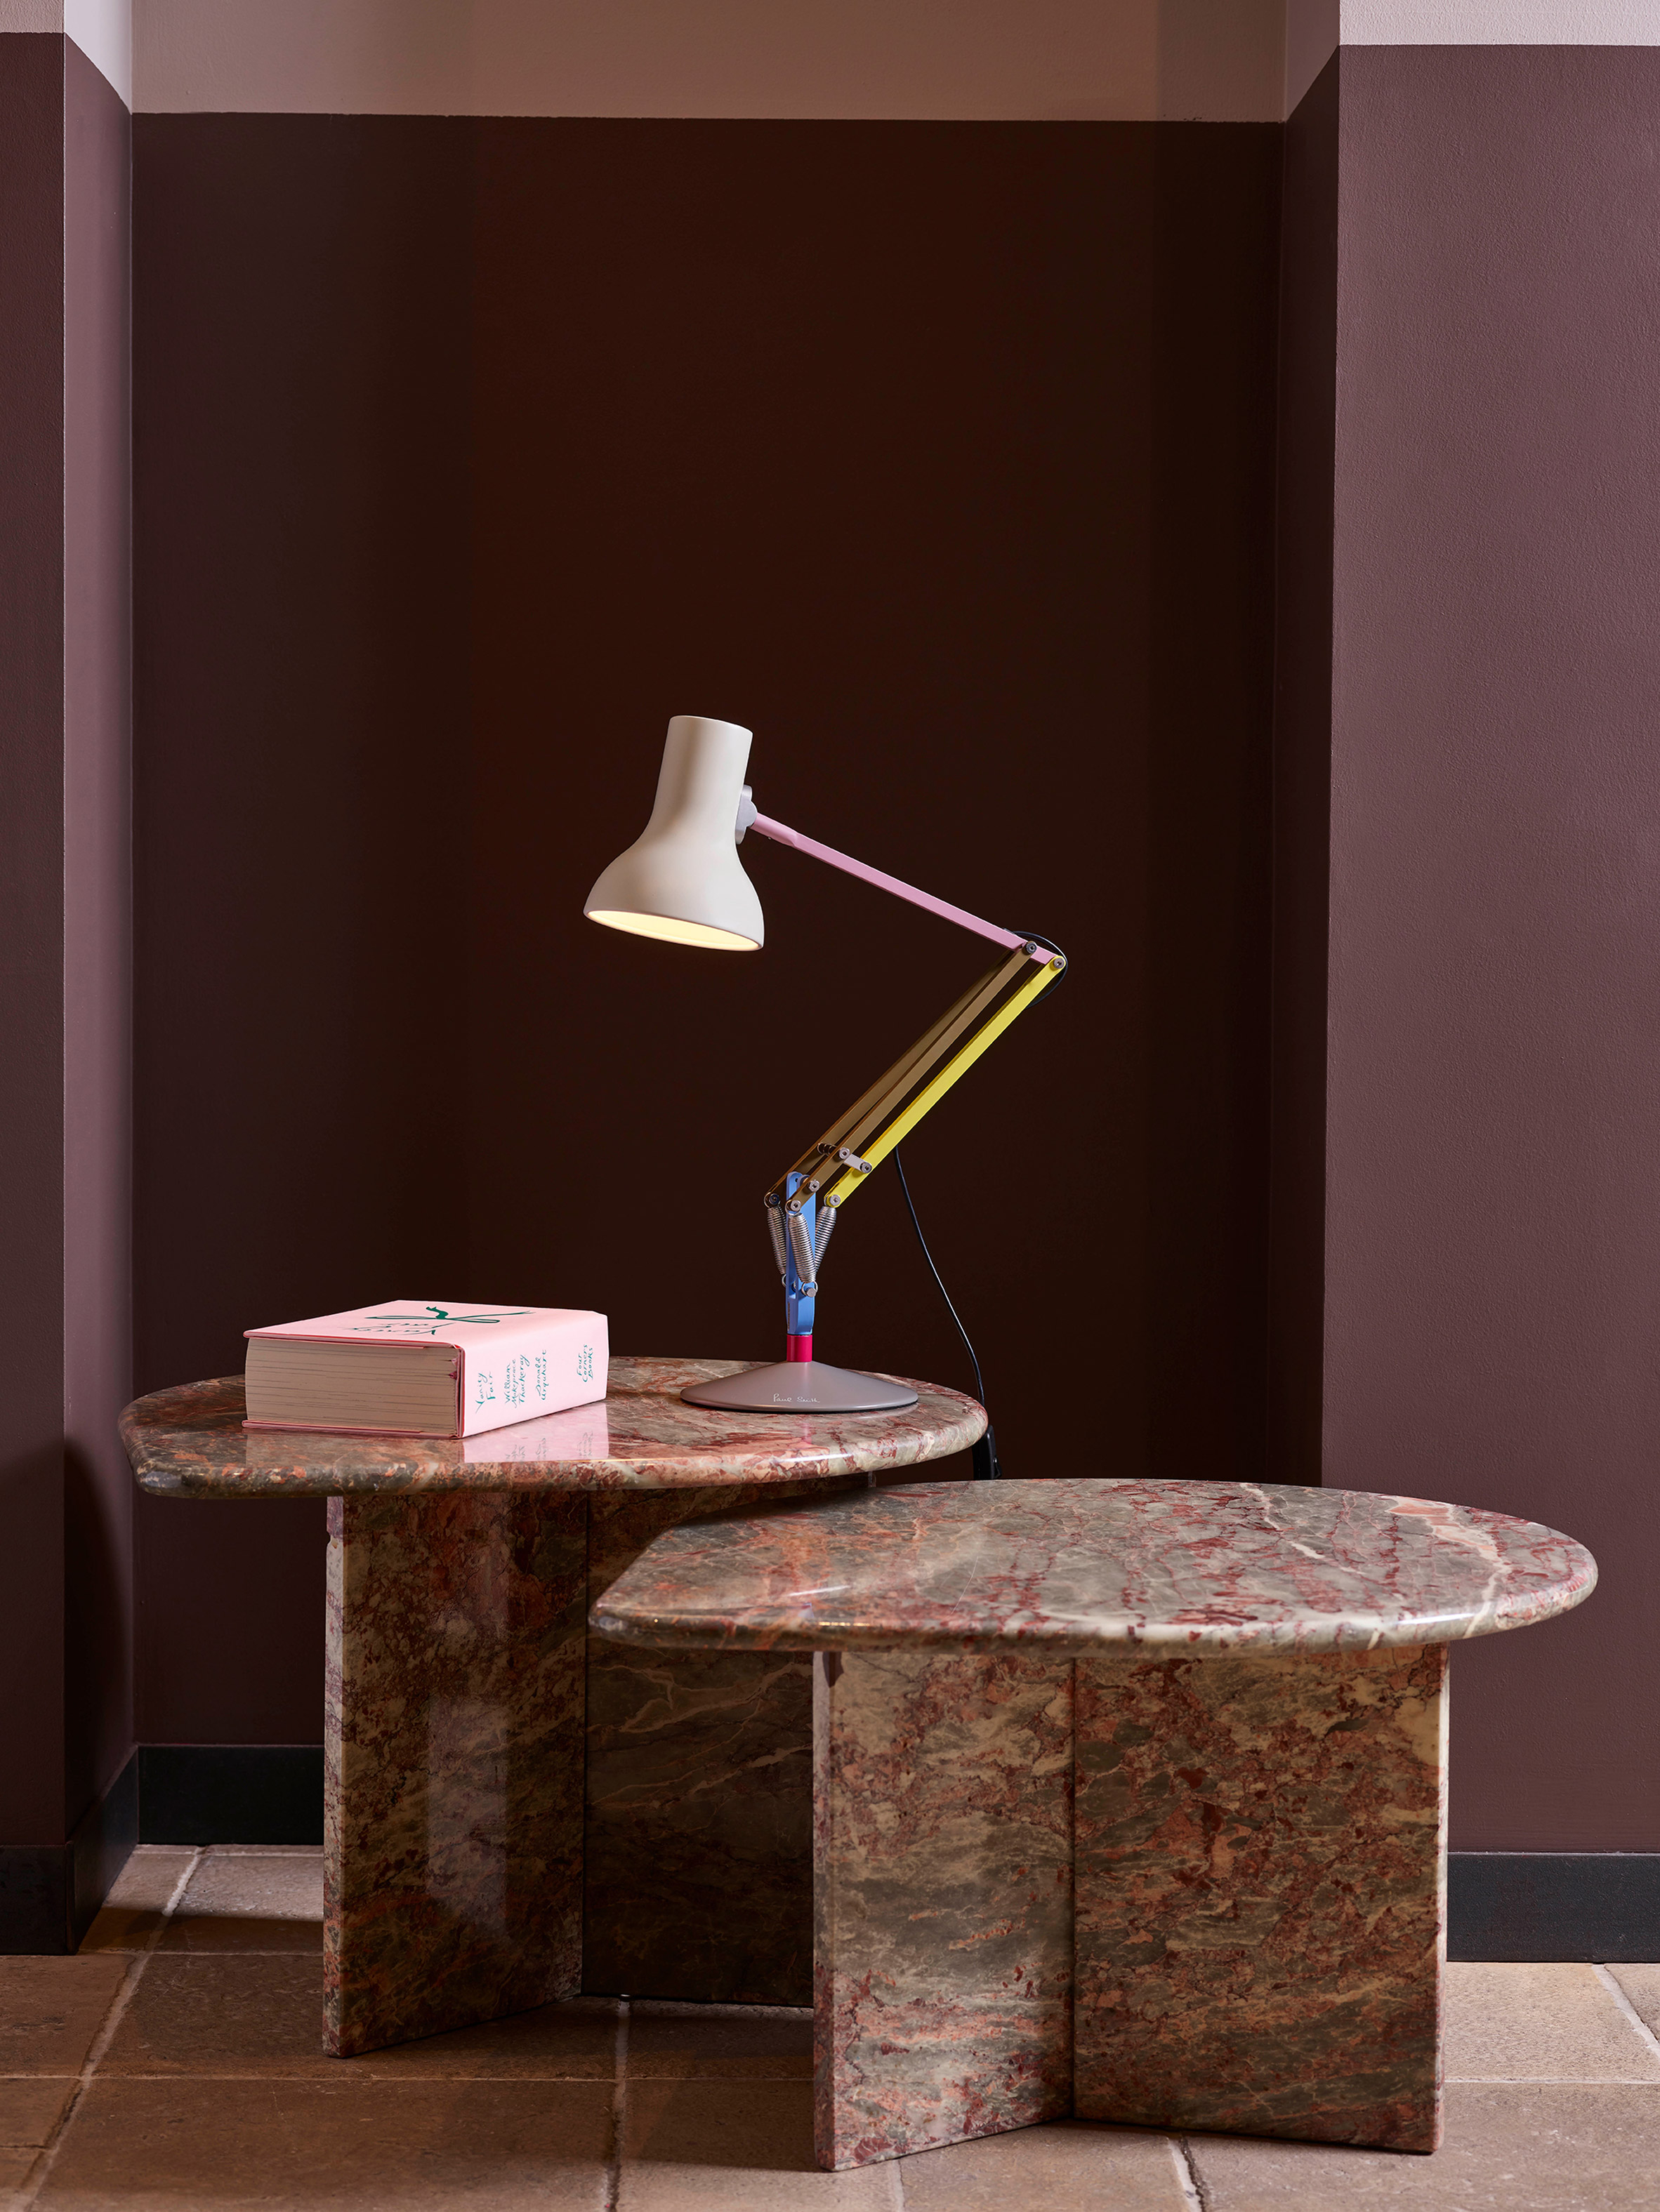 Competition: win an Anglepoise + Paul Smith desk lamp